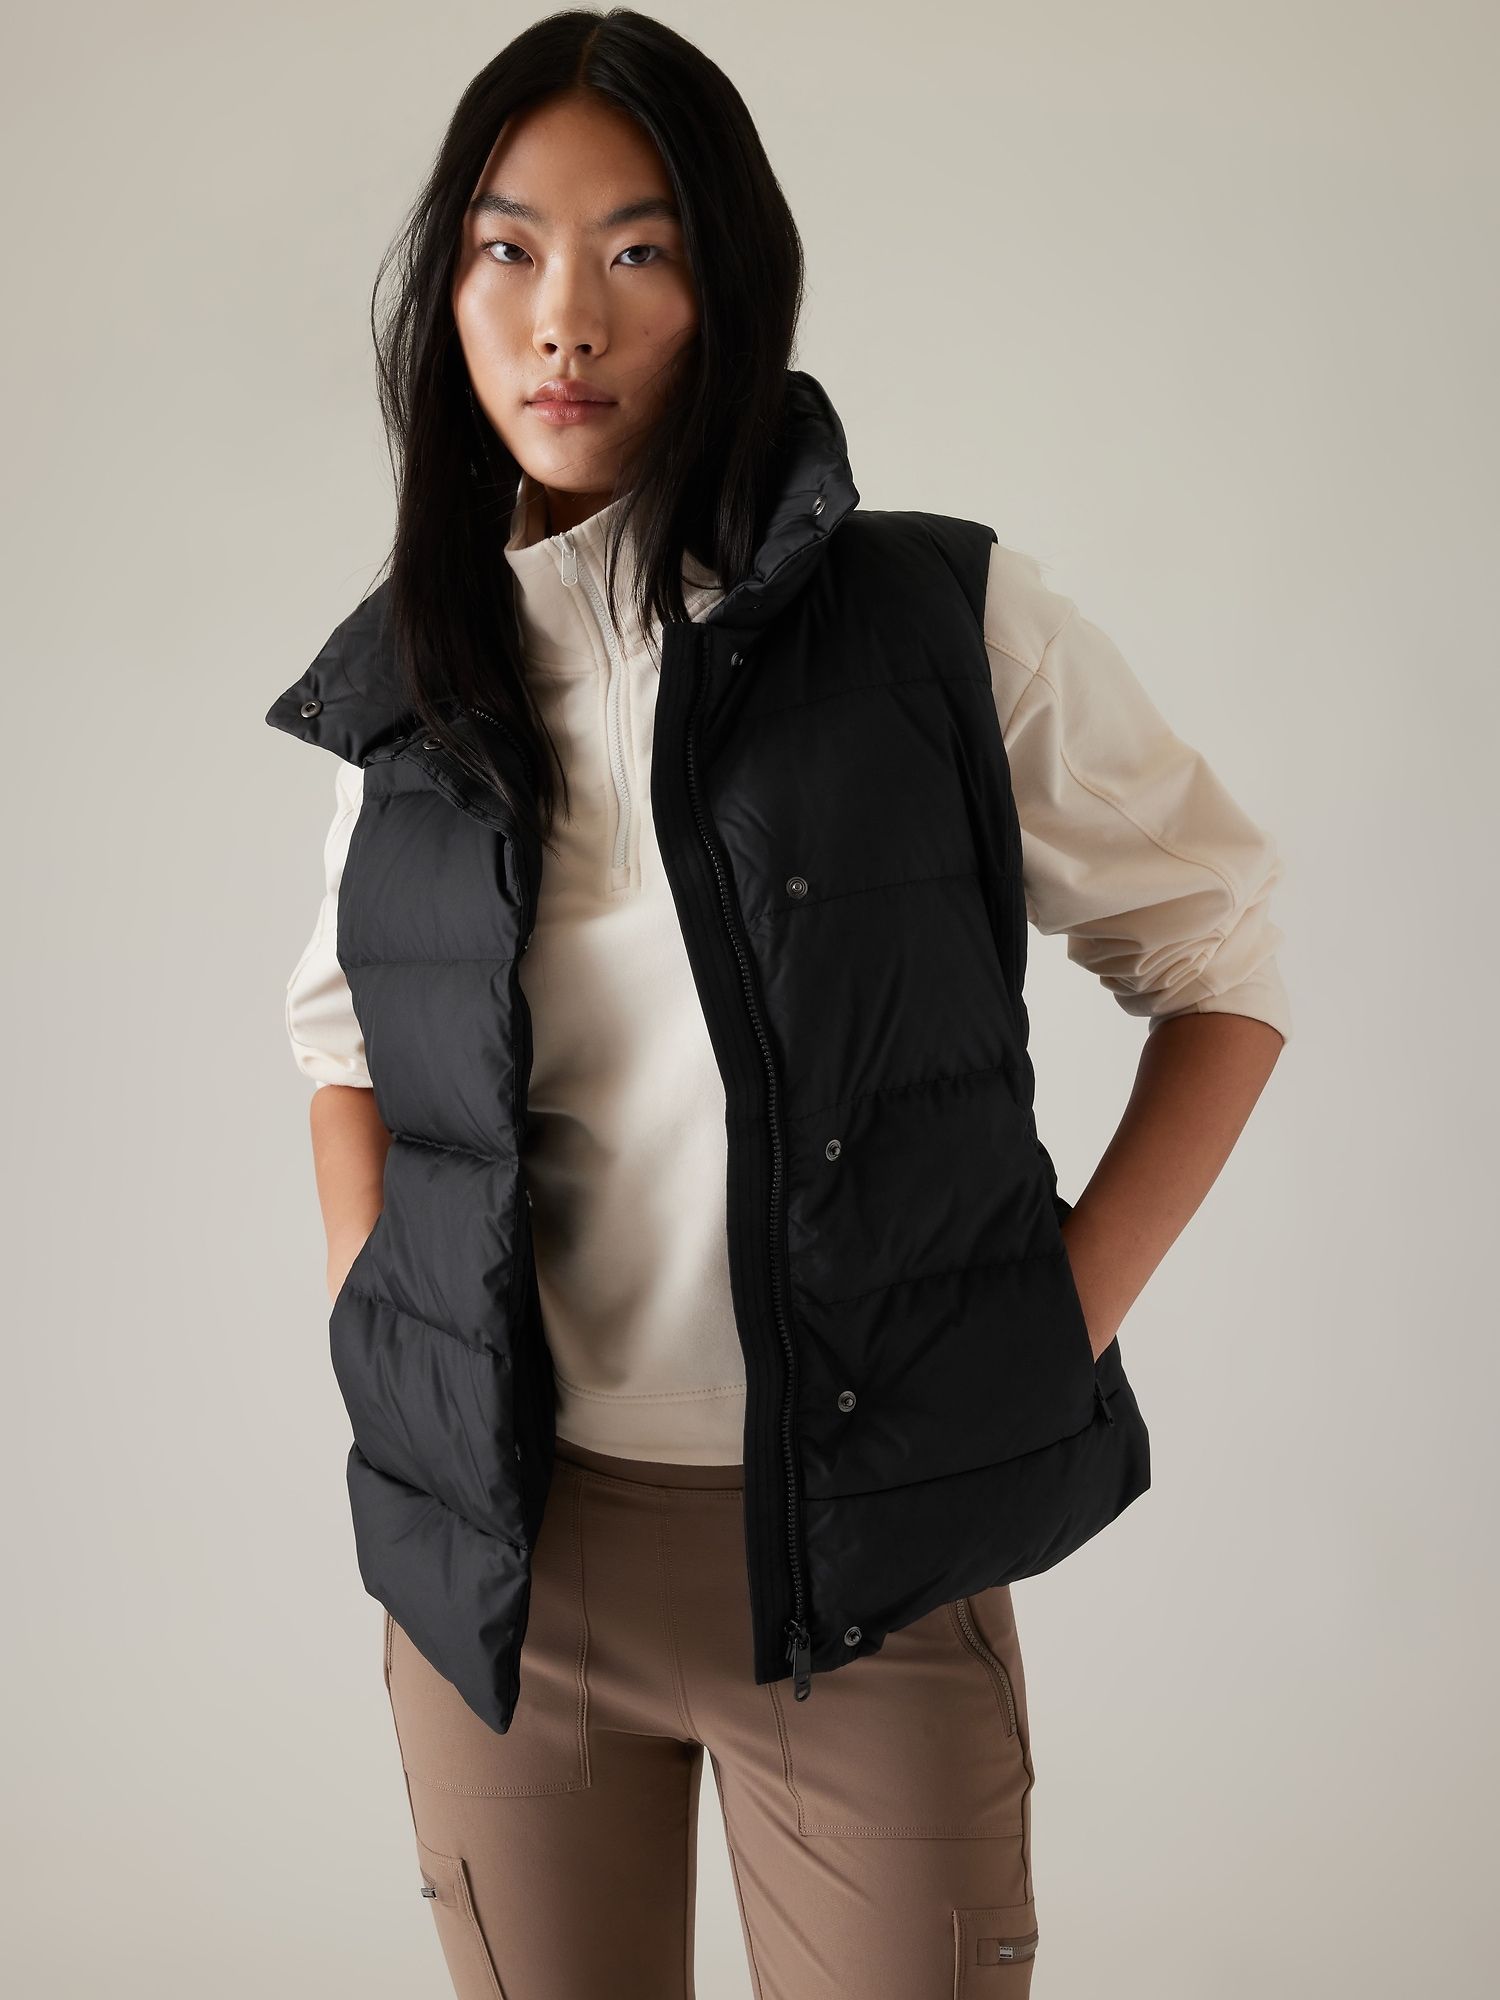 These Puffer Vests for Women Are the Perfect Transition Piece